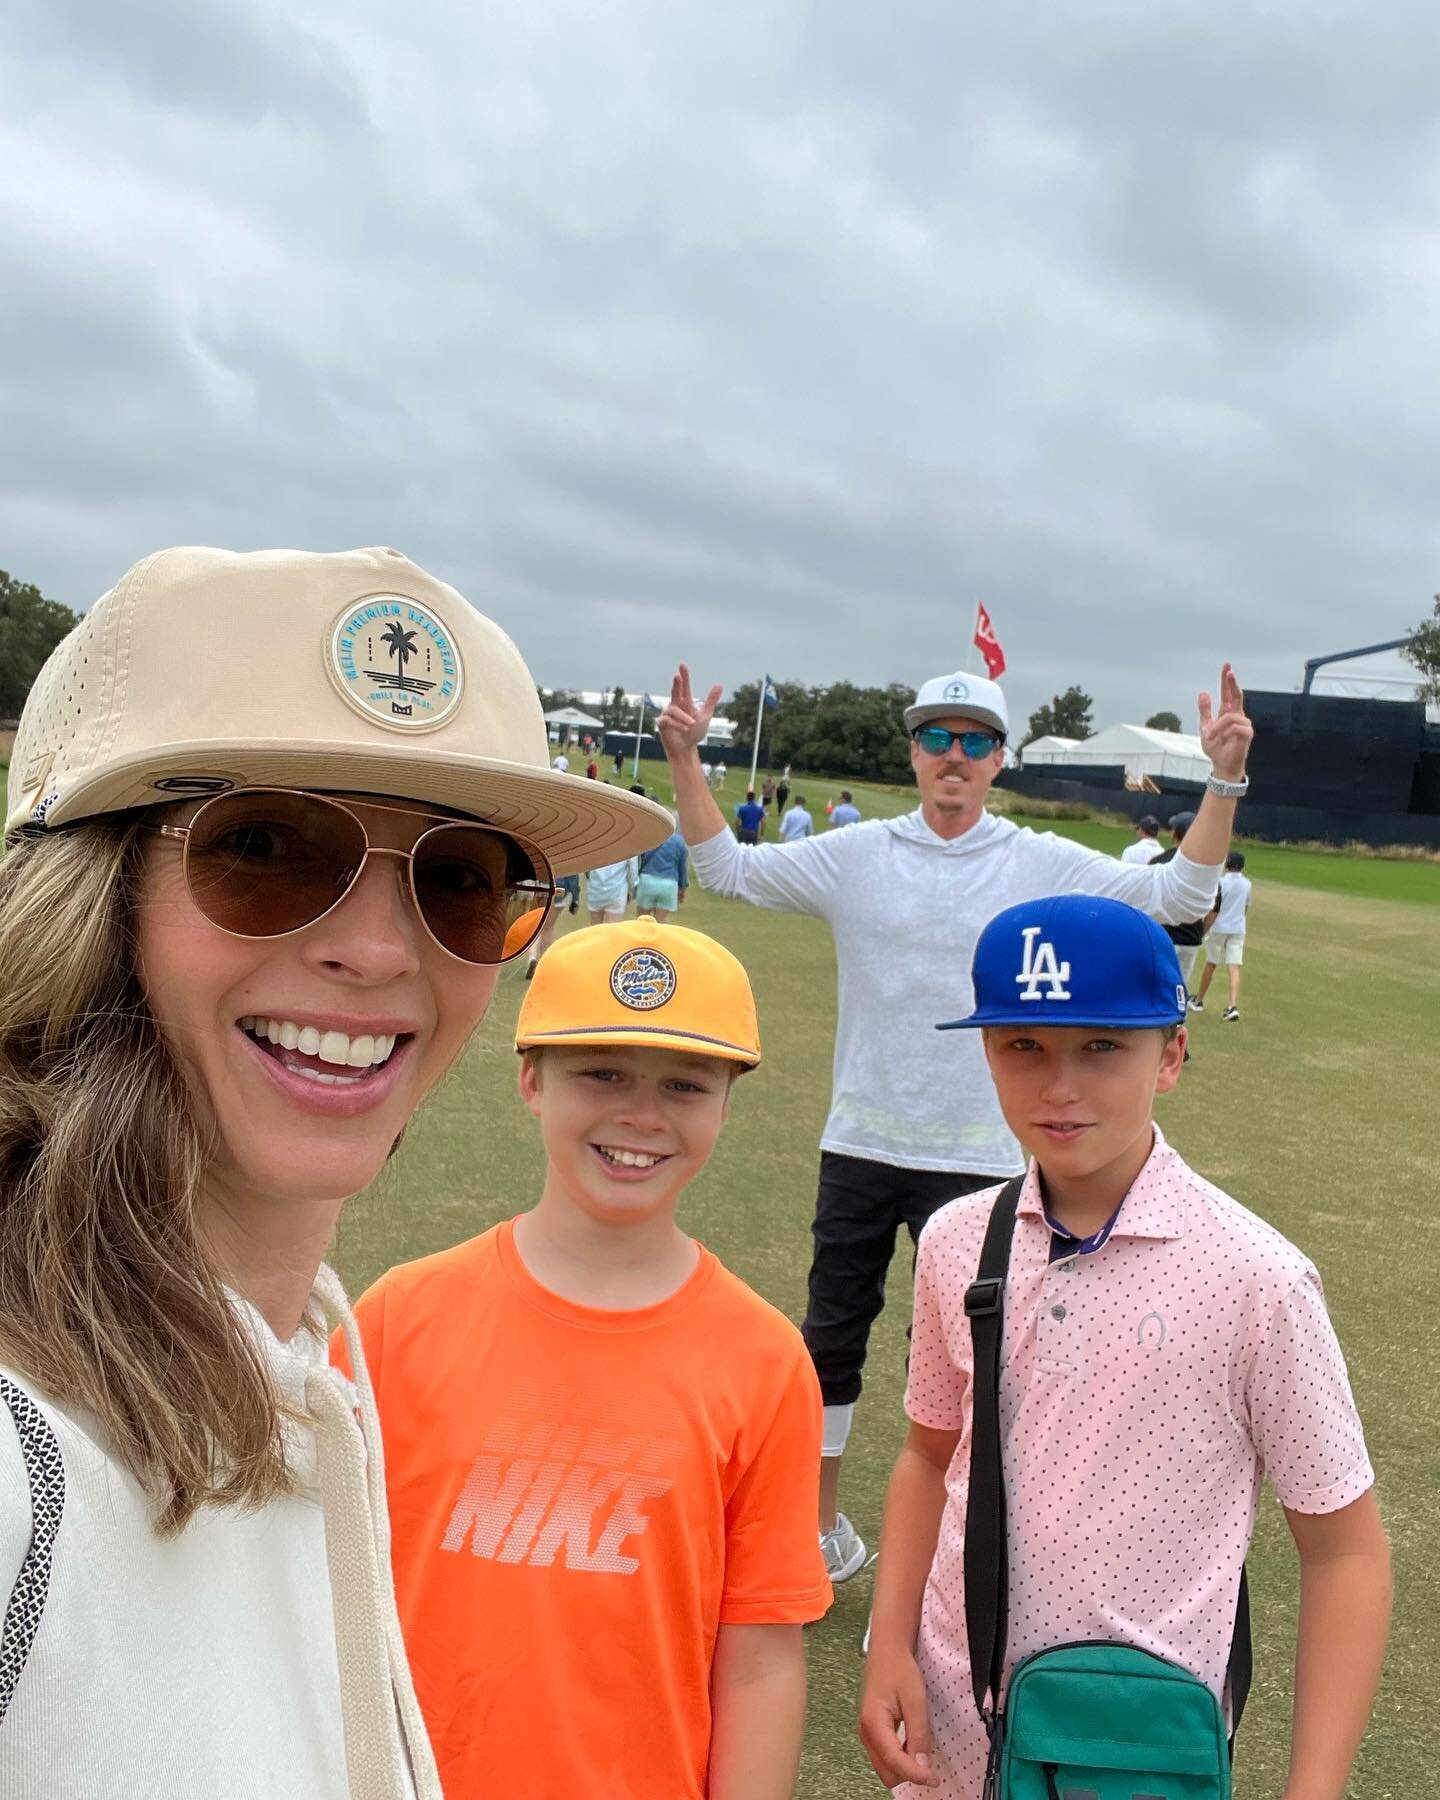 What a fun day at the @usopengolf walked 5.5 miles, kids got an autograph from @harris_english with winner 🏆 @wyndhamclark in the background and a pic with the putter from Happy Gilmore 🏒 #goducks